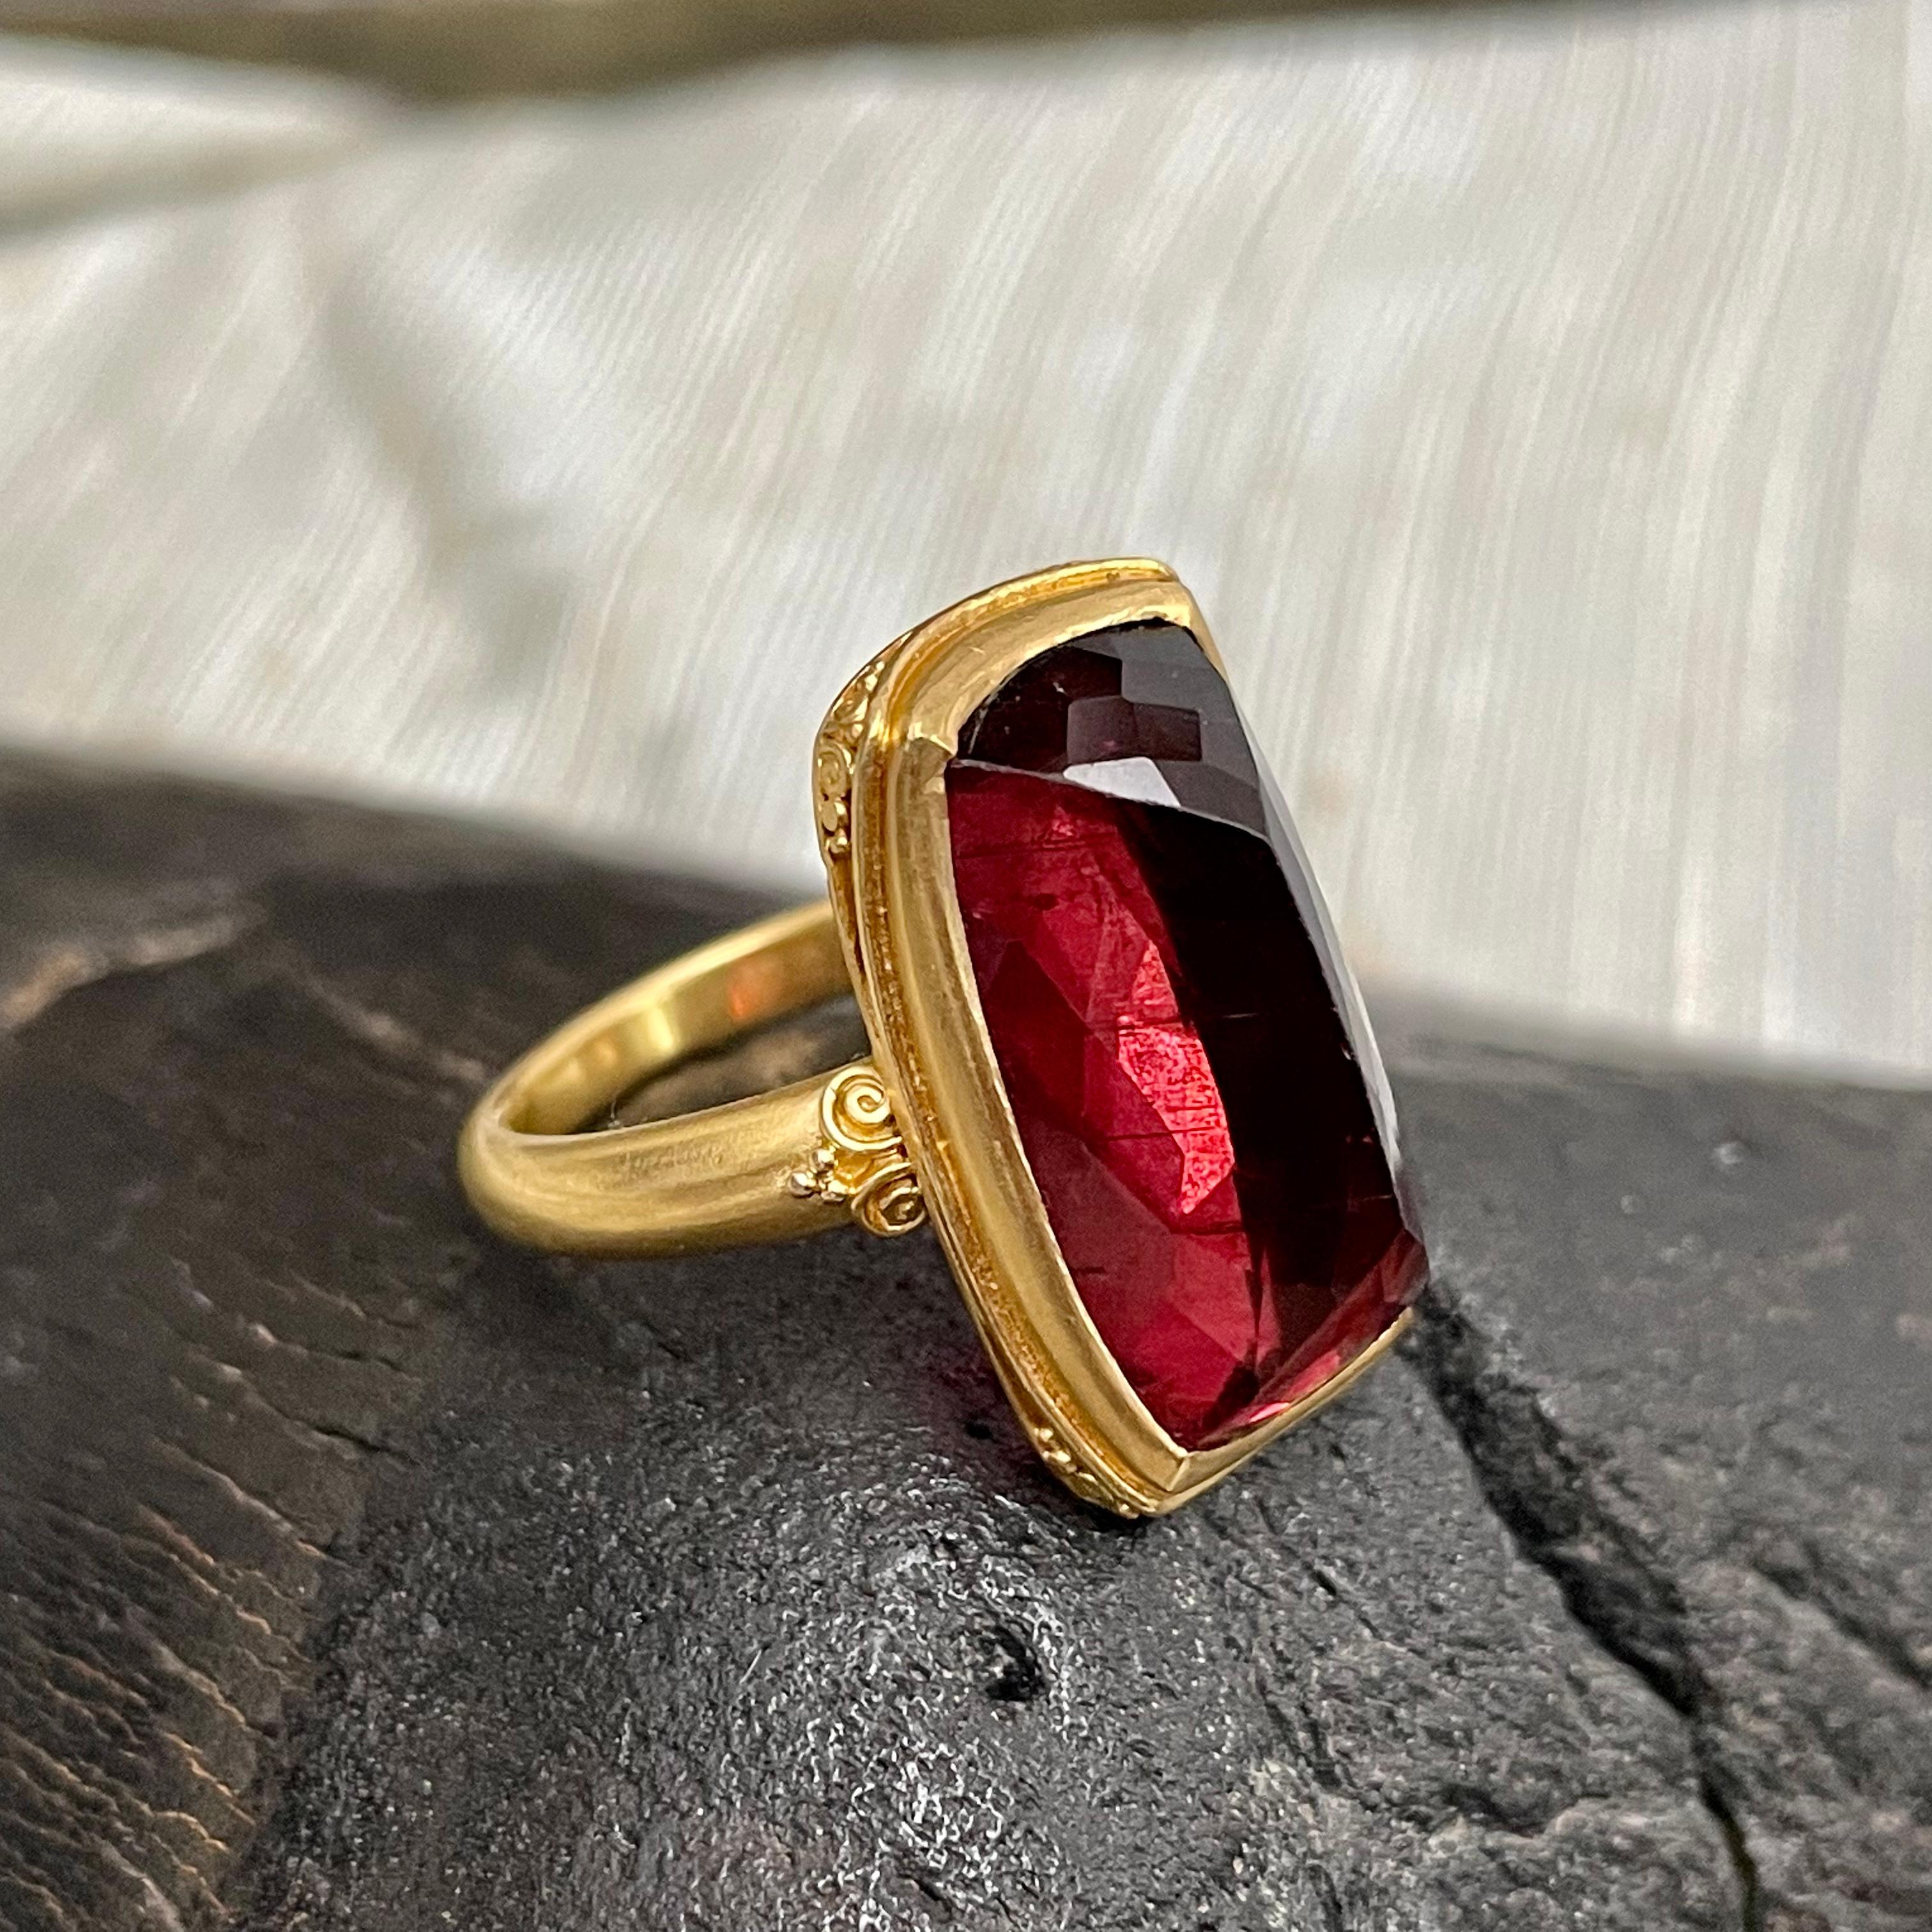 A juicy long cushion cut 14 x 32 mm pink tourmaline is set into a signature ancient-inspired Steven Battelle handmade 22K design featuring spiral and 